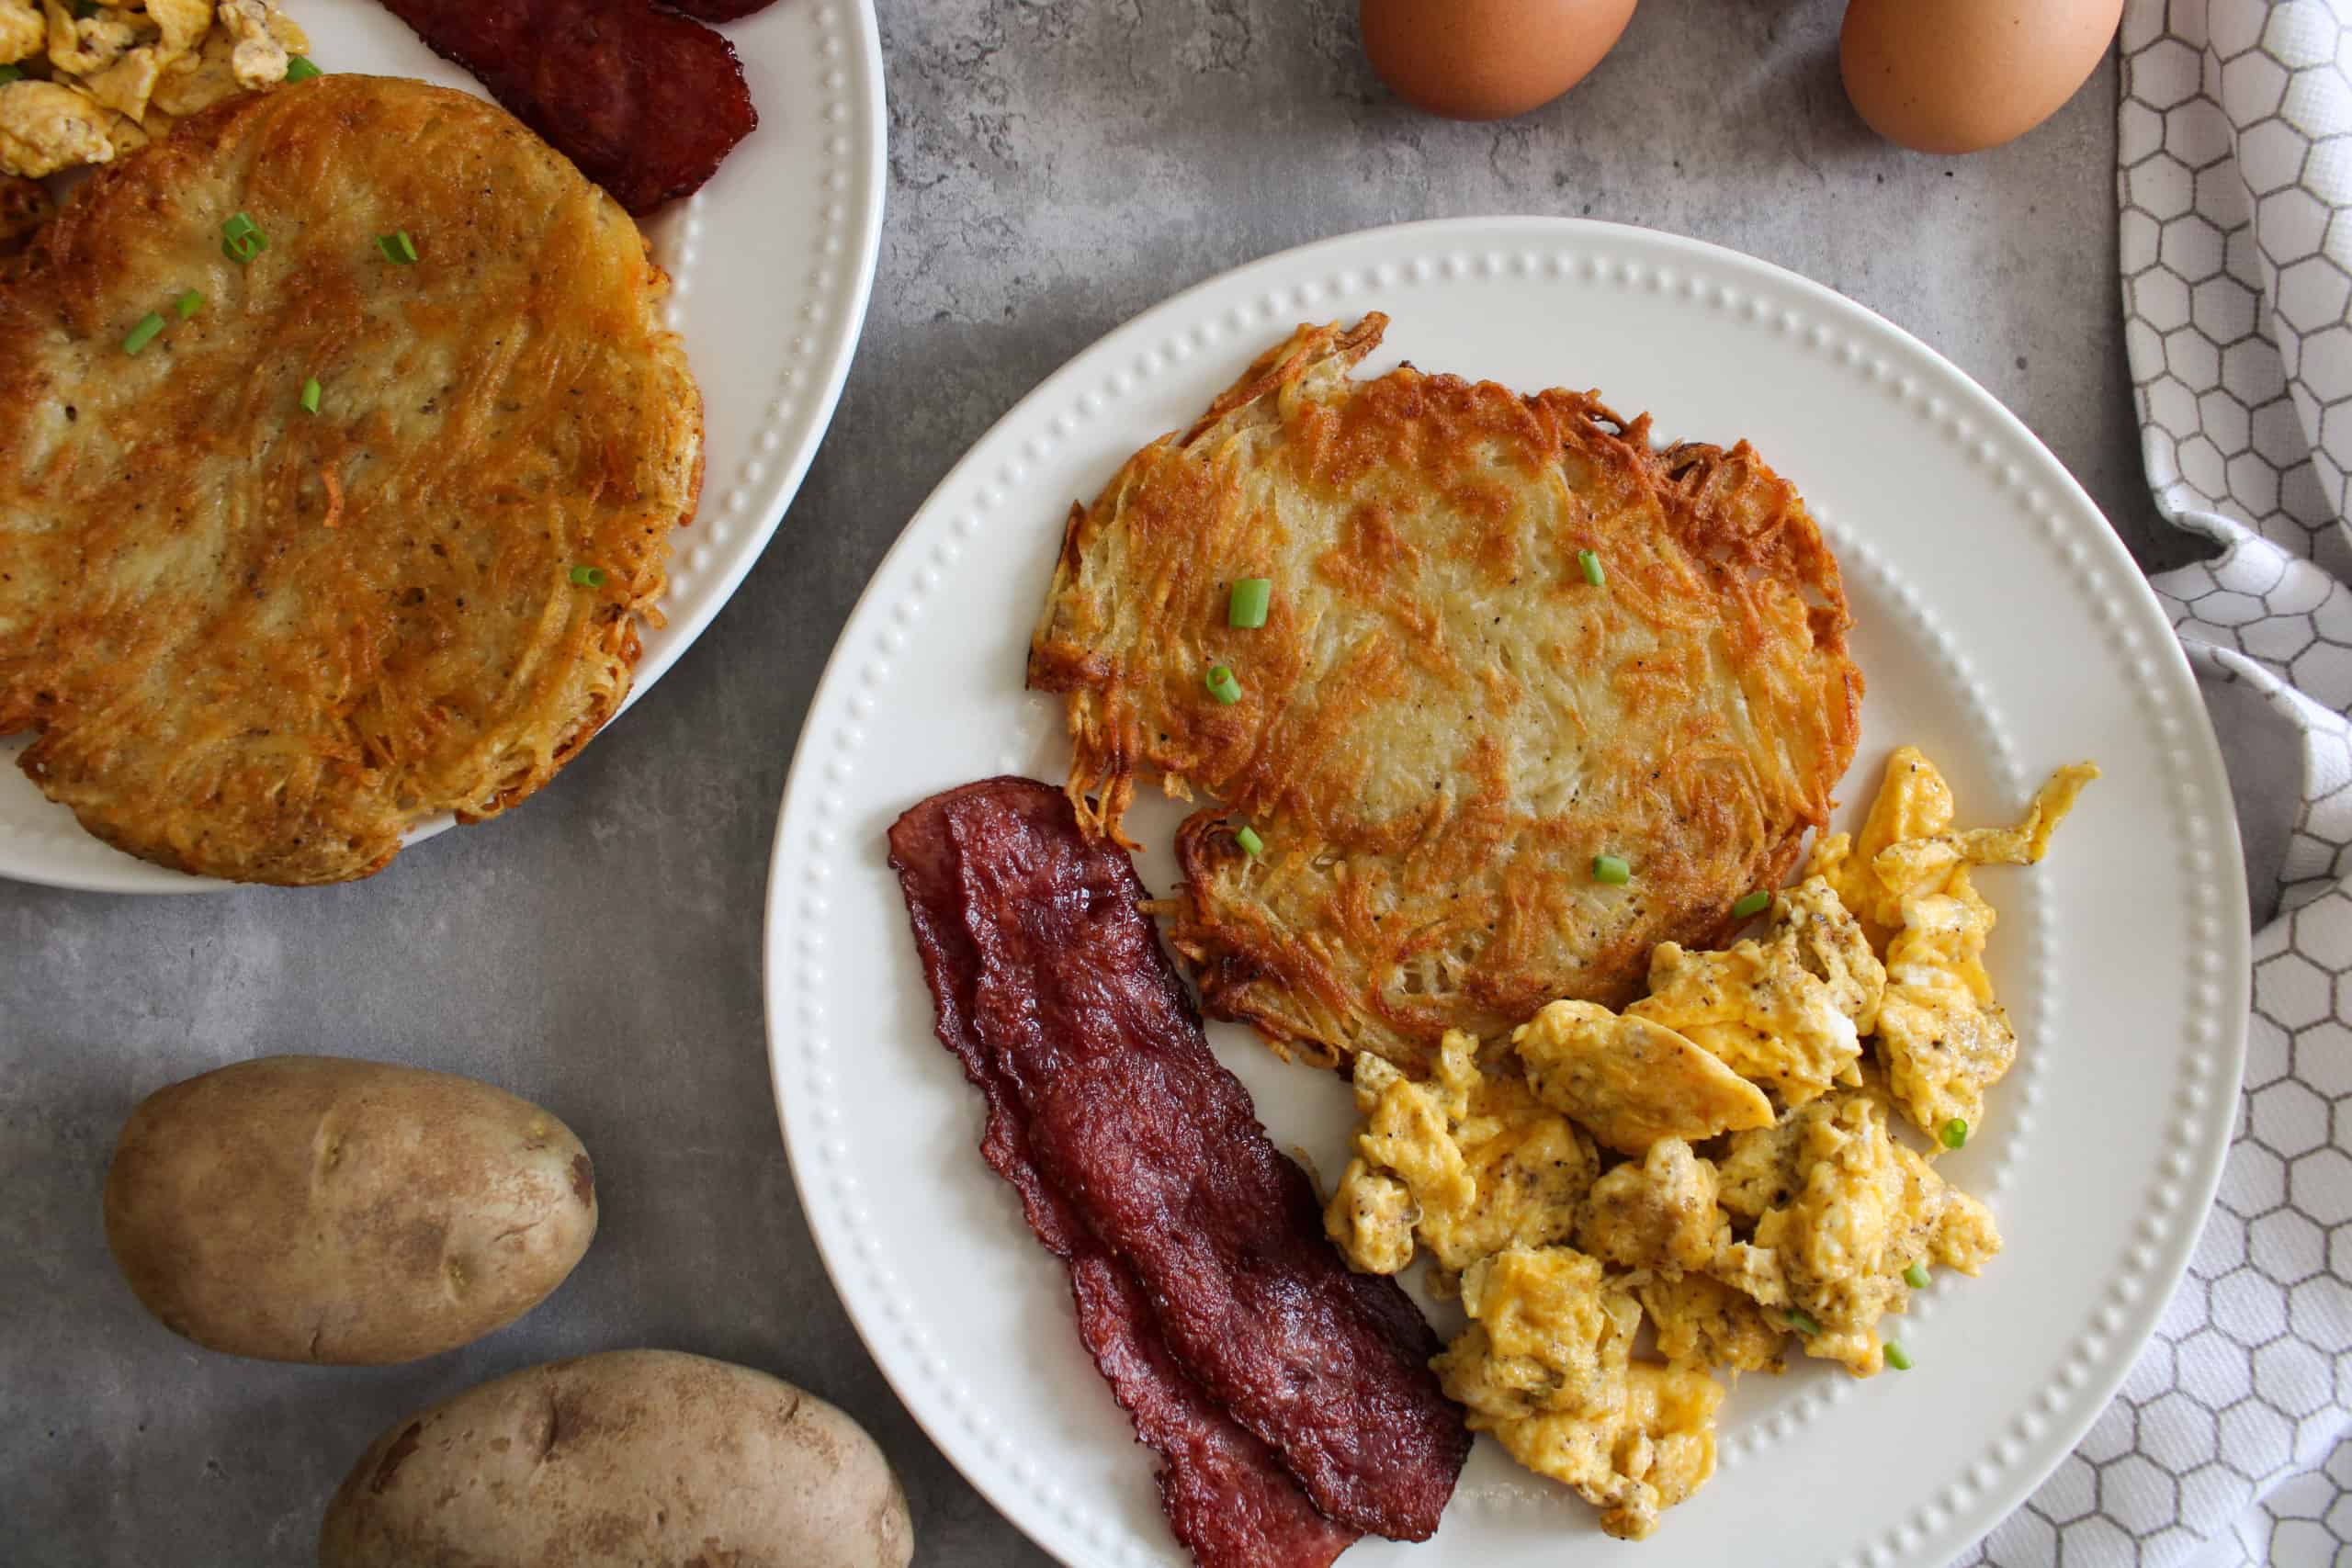 https://www.themidwestkitchenblog.com/wp-content/uploads/2021/12/cheesy-hash-browns-scaled.jpg